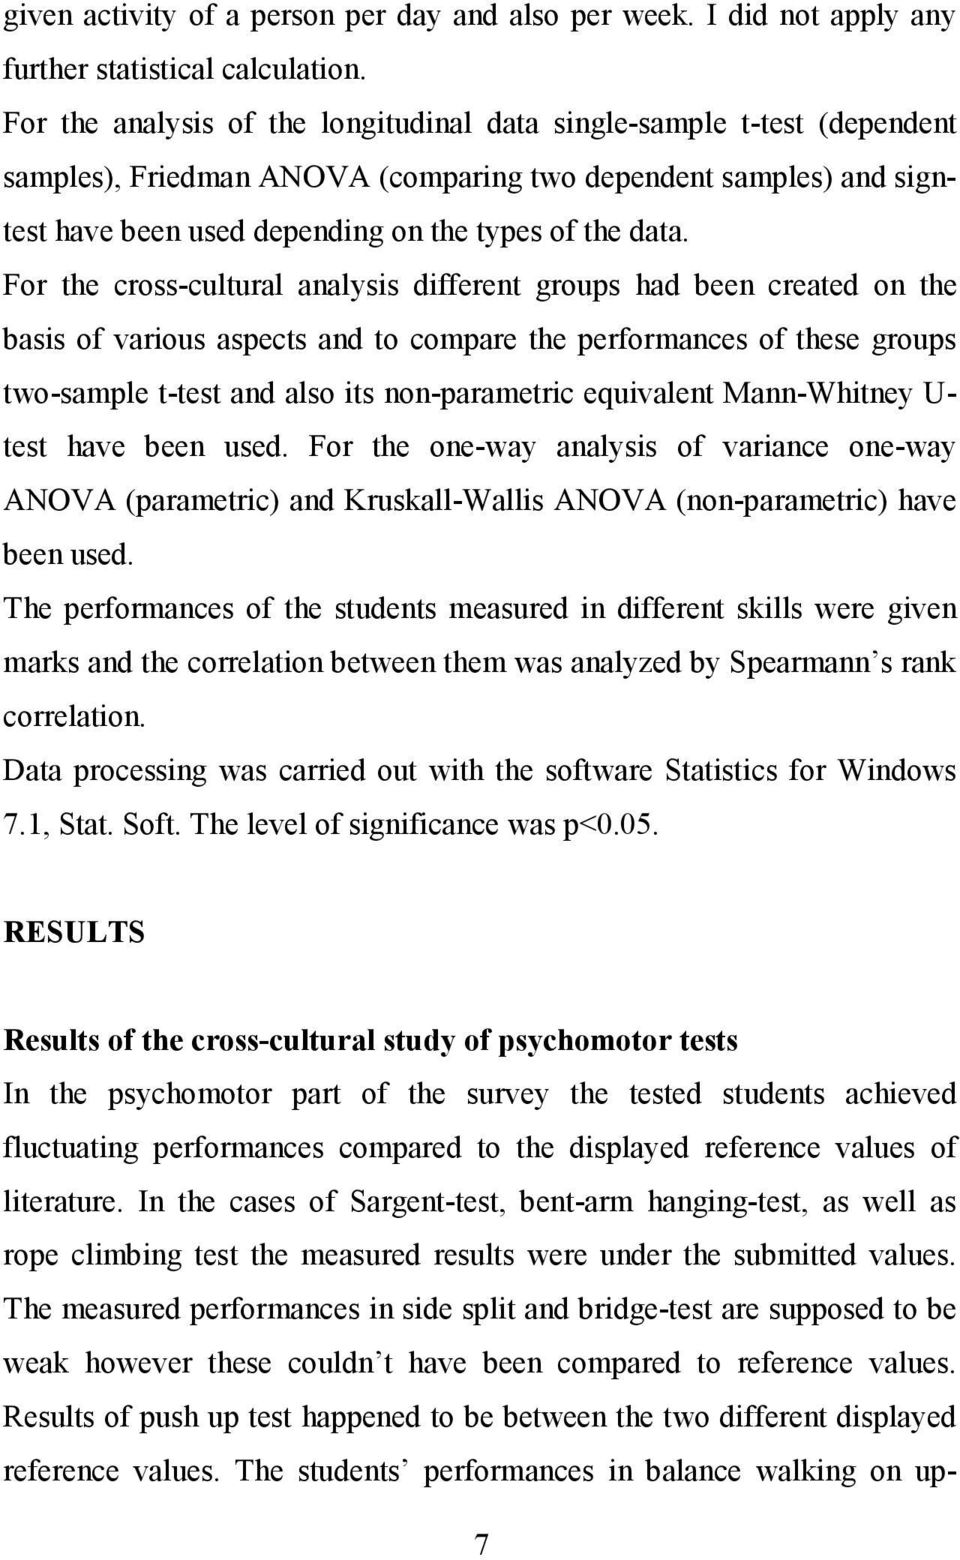 For the cross-cultural analysis different groups had been created on the basis of various aspects and to compare the performances of these groups two-sample t-test and also its non-parametric